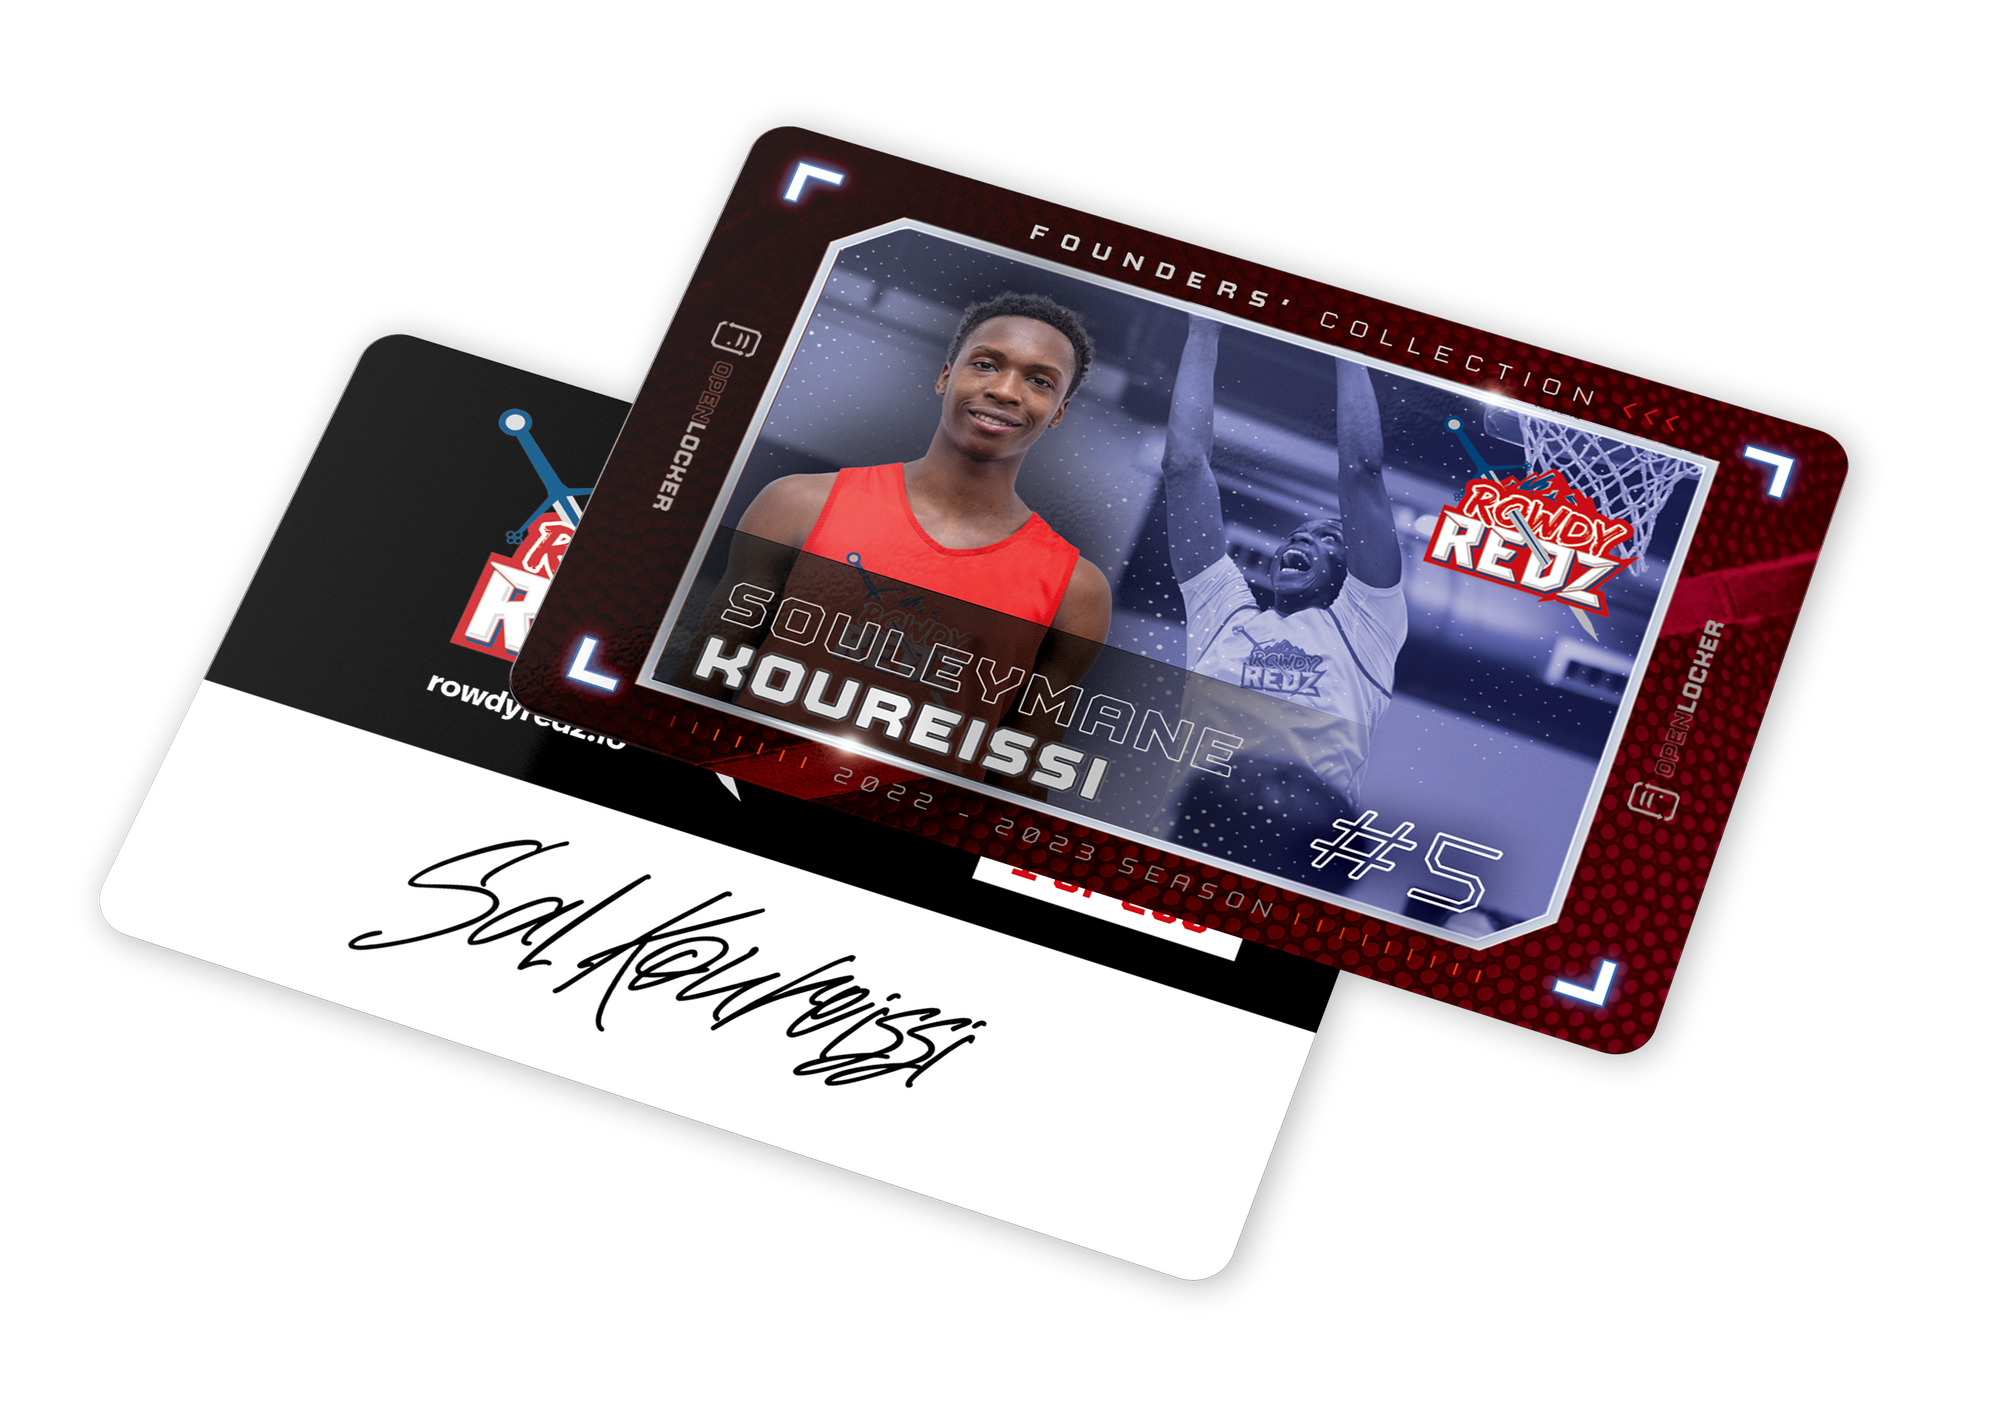 Rowdy Redz Basketball Collection Autographed Physical Card: Koureissi Souleymane